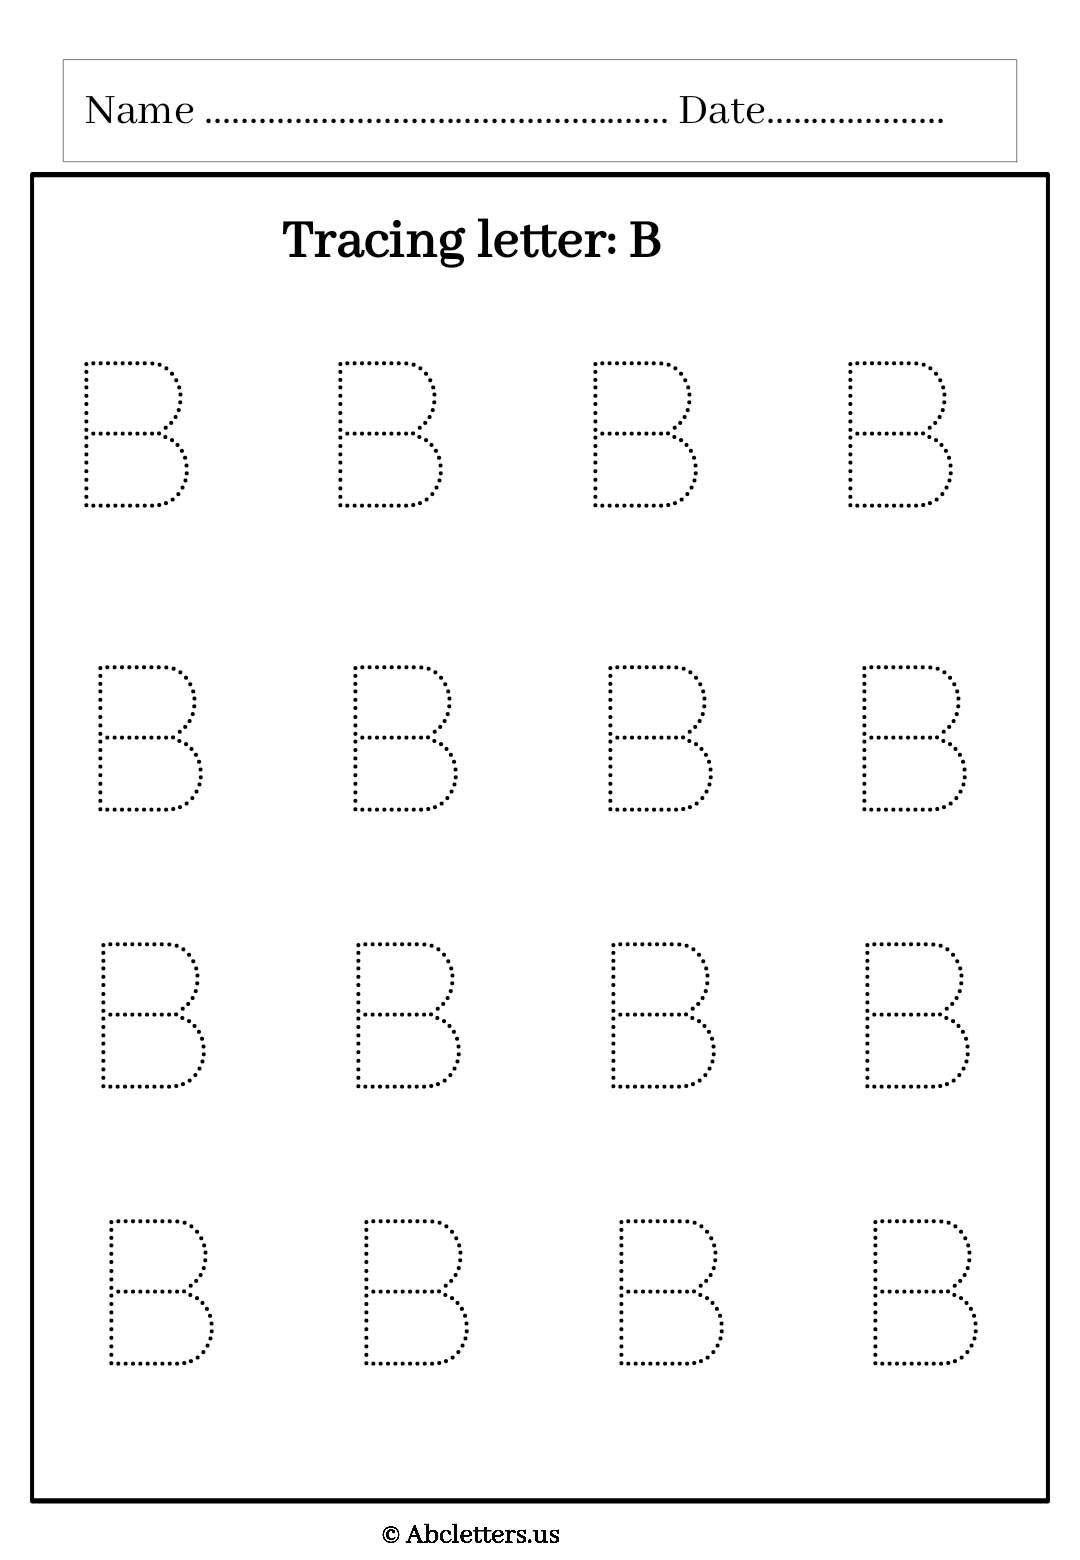 Tracing letter uppercase B